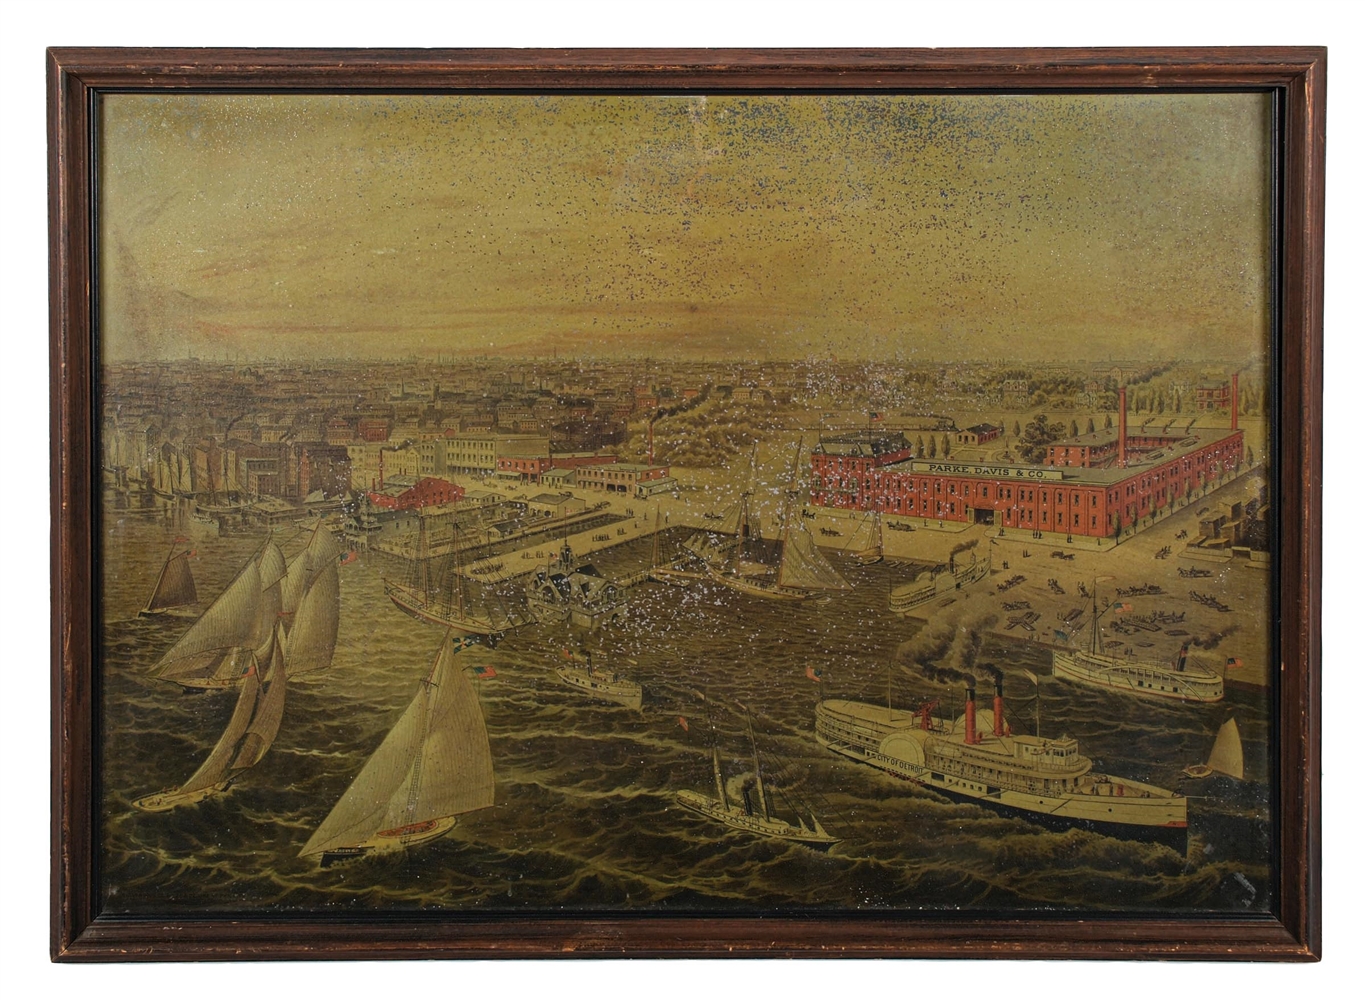 TIN LITHOGRAPH CITY OF DETROIT INDUSTRIAL WATERFRONT SCENE W/ SAILBOAT GRAPHICS